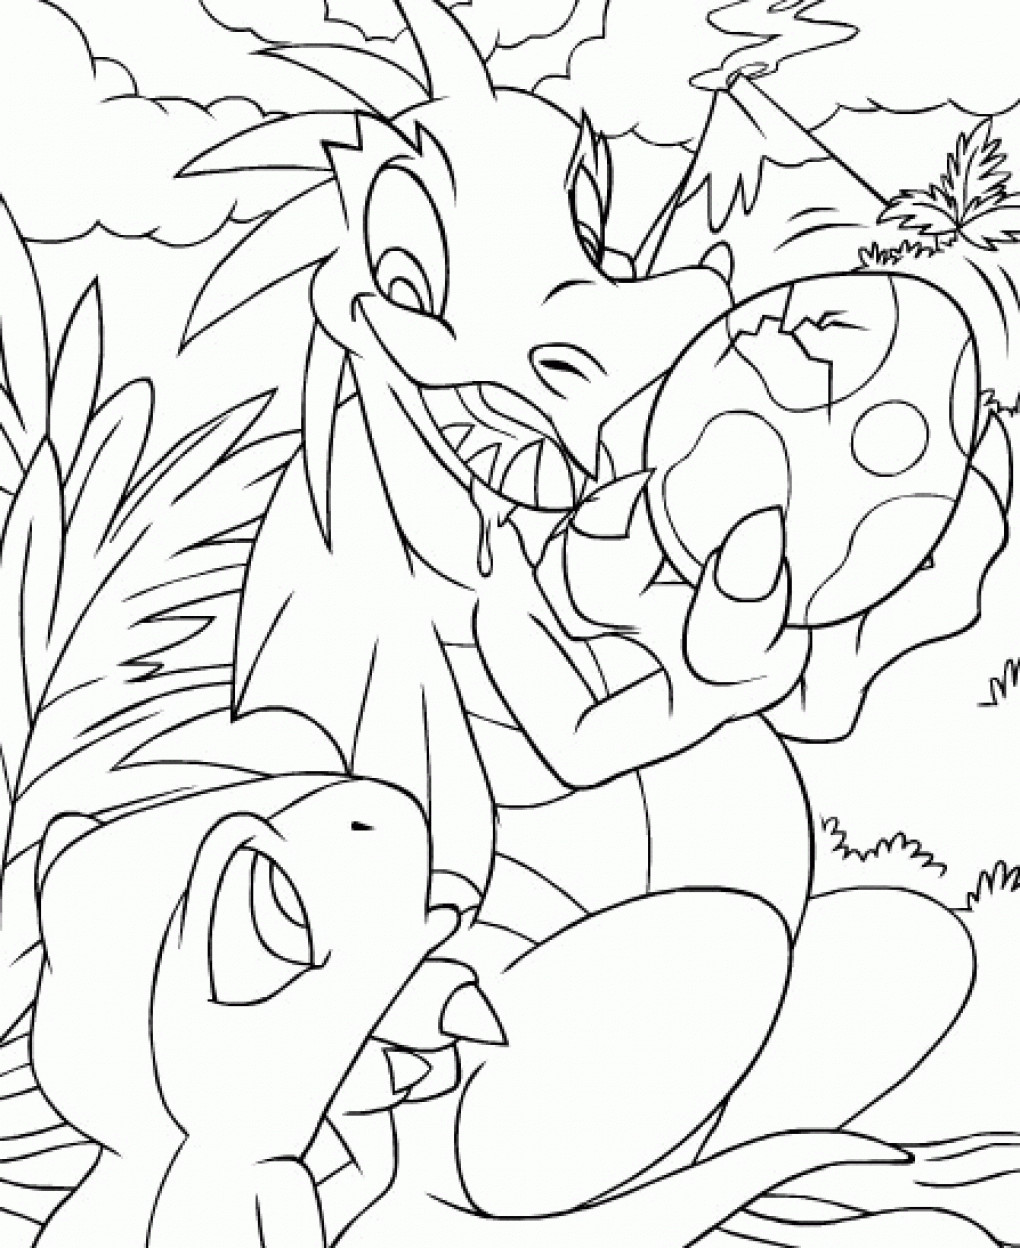 Free Printable Toddler Coloring Sheets
 Free Printable Neopets Coloring Pages For kids